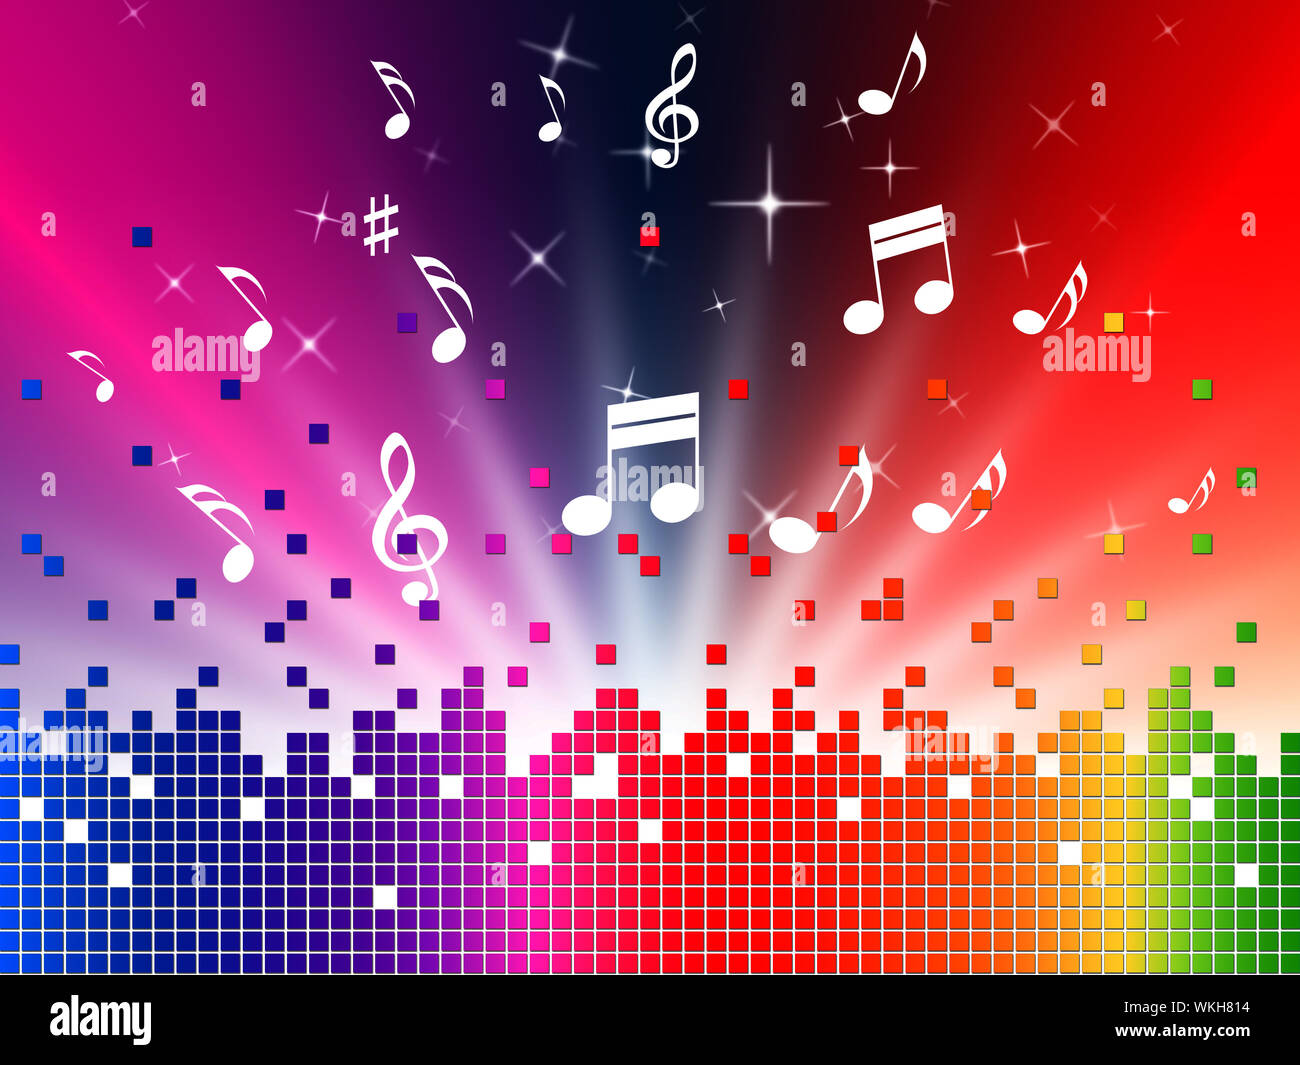 https://c8.alamy.com/comp/WKH814/colorful-music-background-showing-sounds-jazz-and-harmony-WKH814.jpg